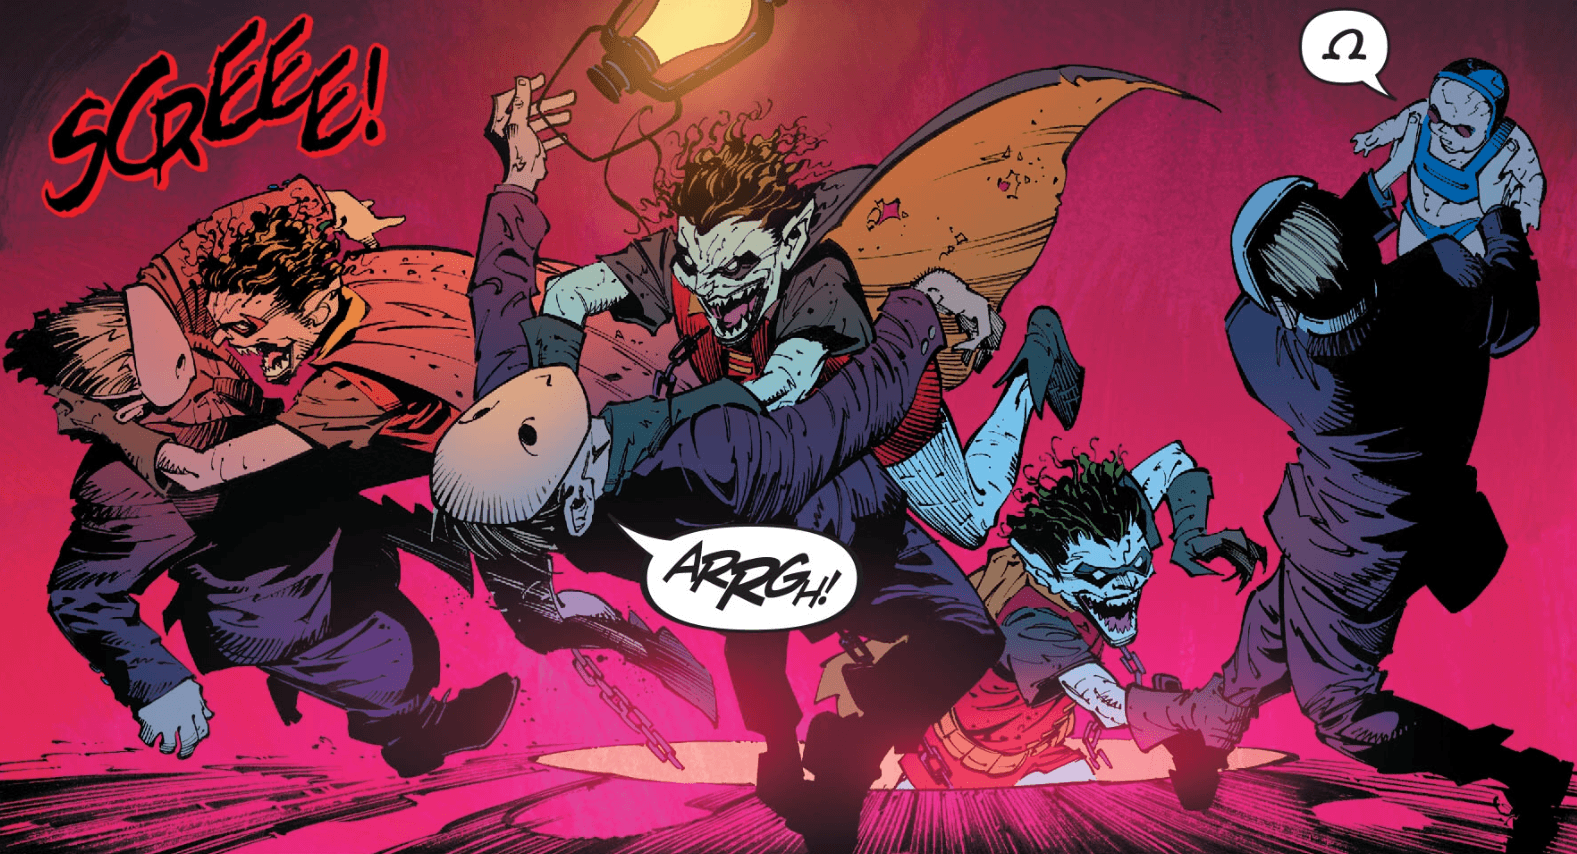 The Batman Who Laughs makes a horrifying, cannibalistic debut